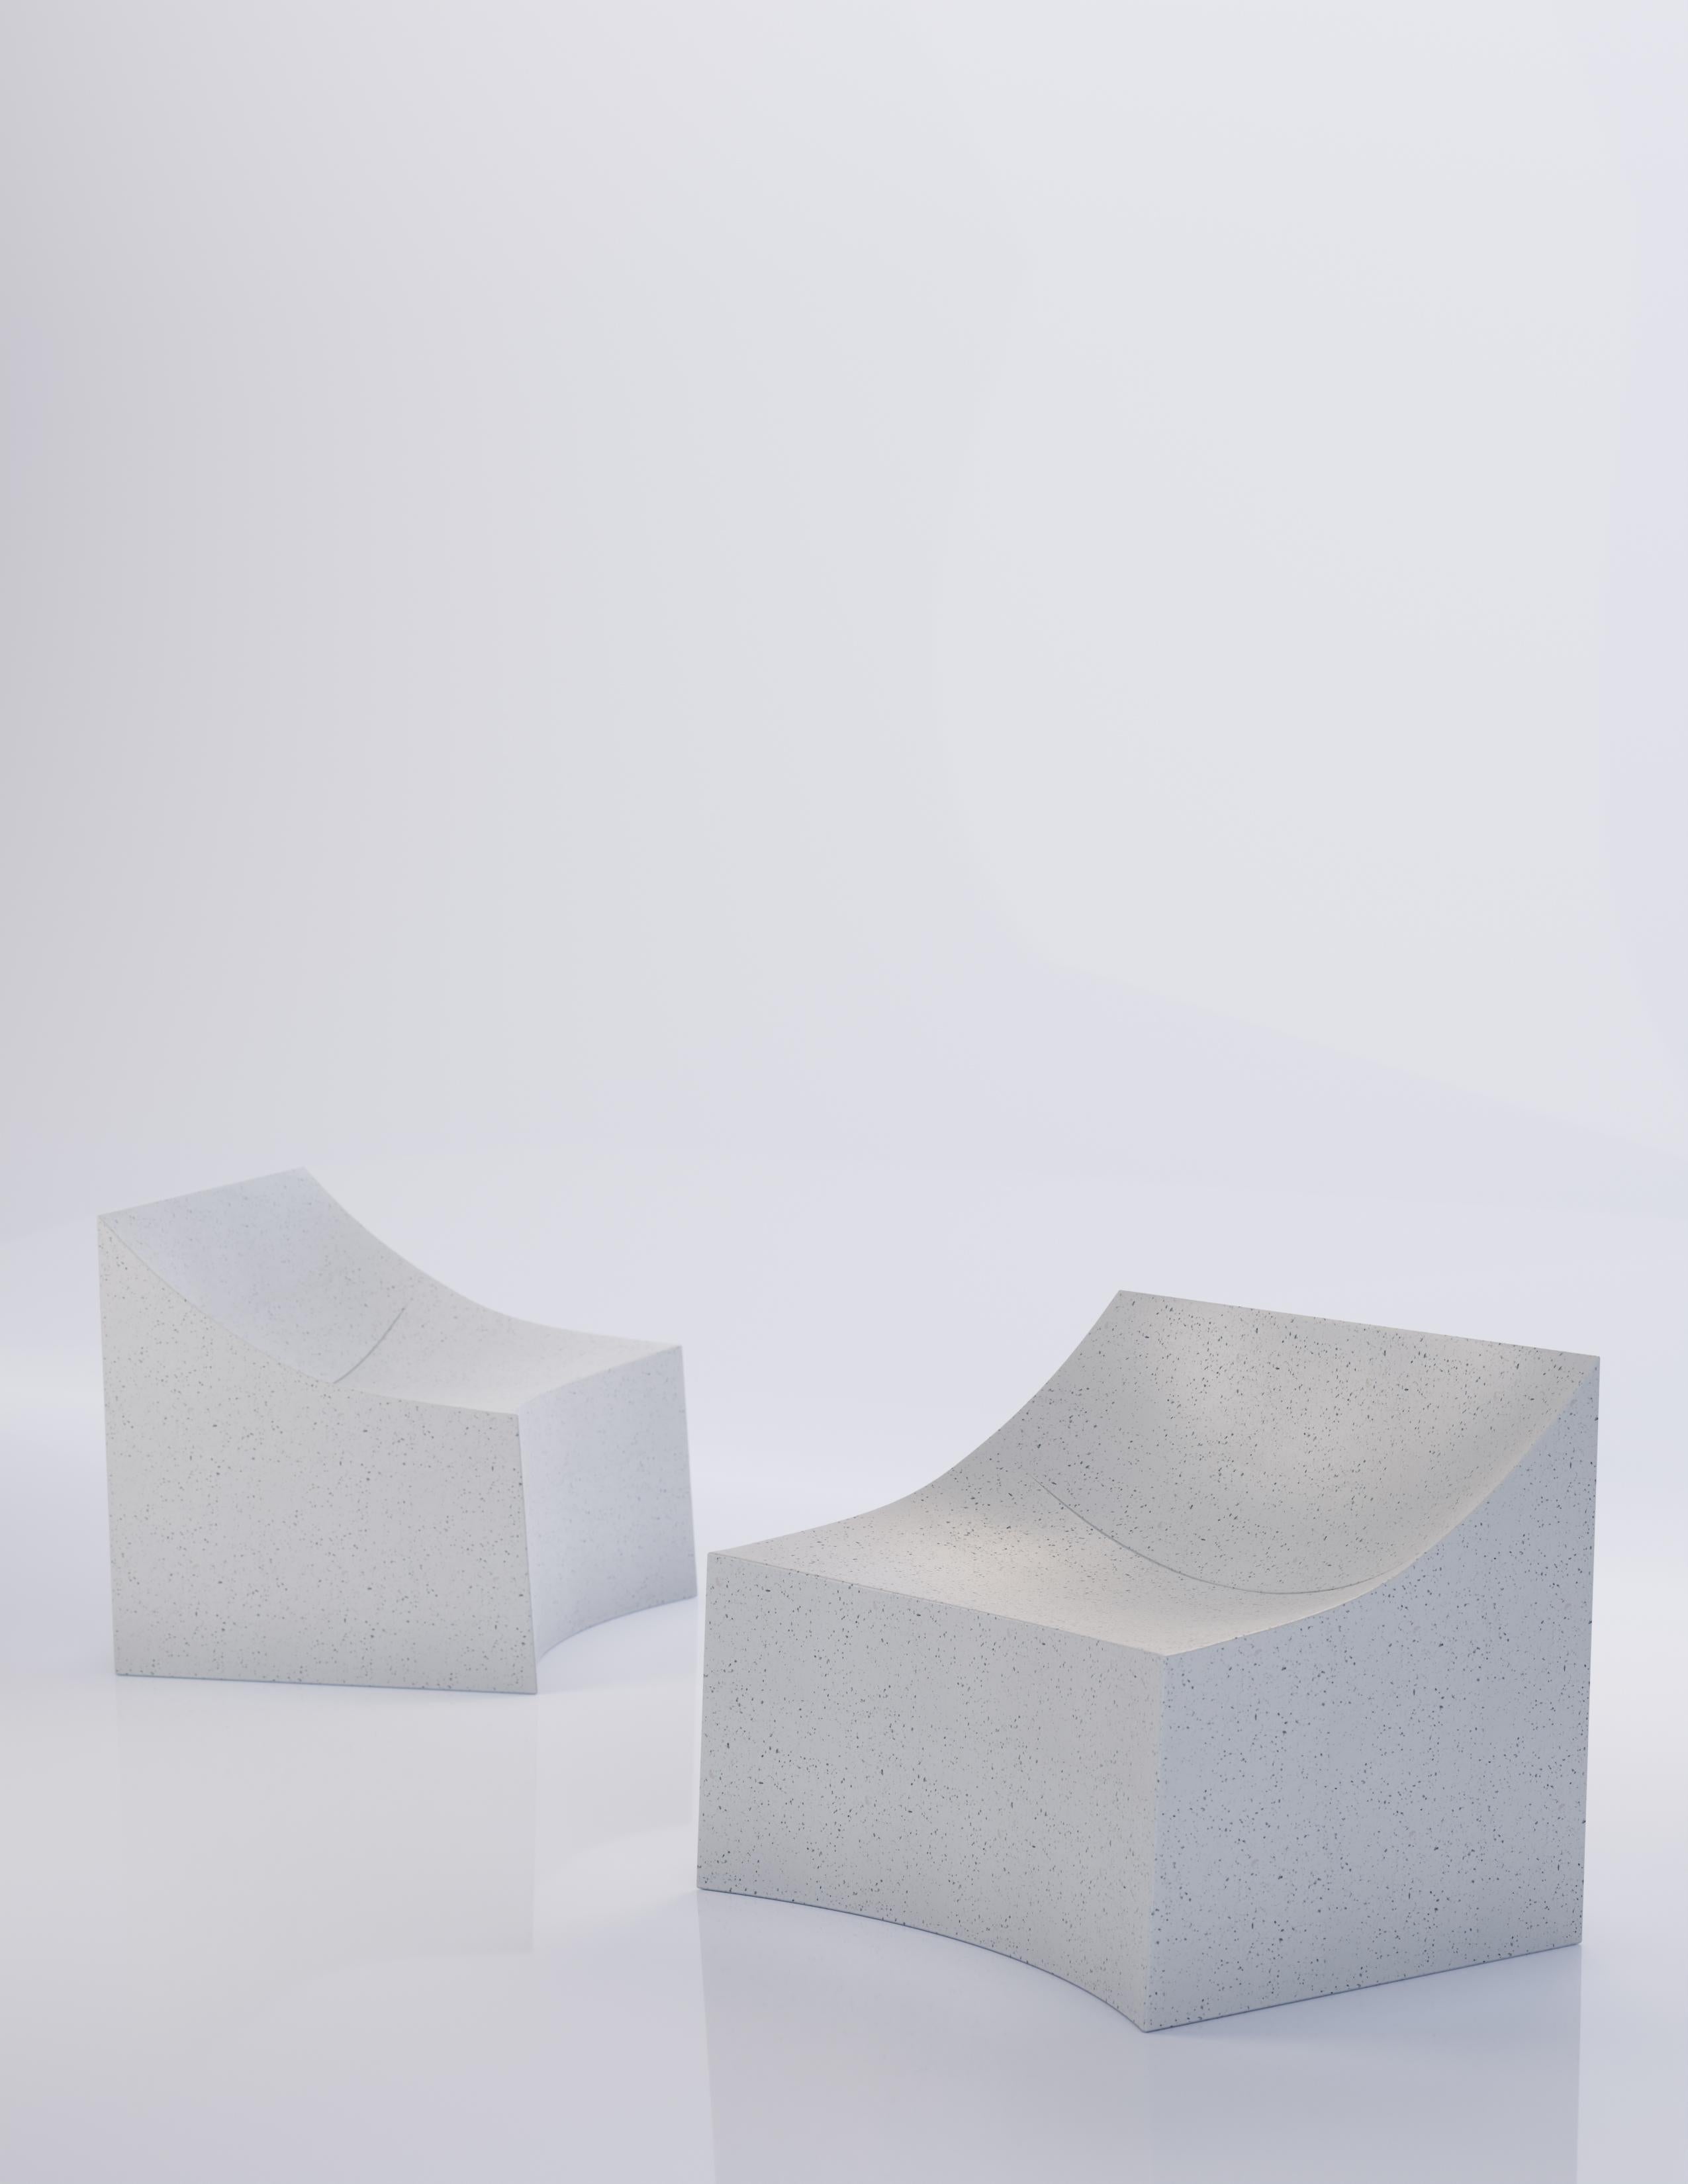 A gently curved silhouette lends comfort and elegance to this monolithic lounger. A slight, swooping indentation in the seat subverts the expectation of stonework, subtly showcasing our lightweight construction.

Dimensions: Width 36 in. (91 cm),